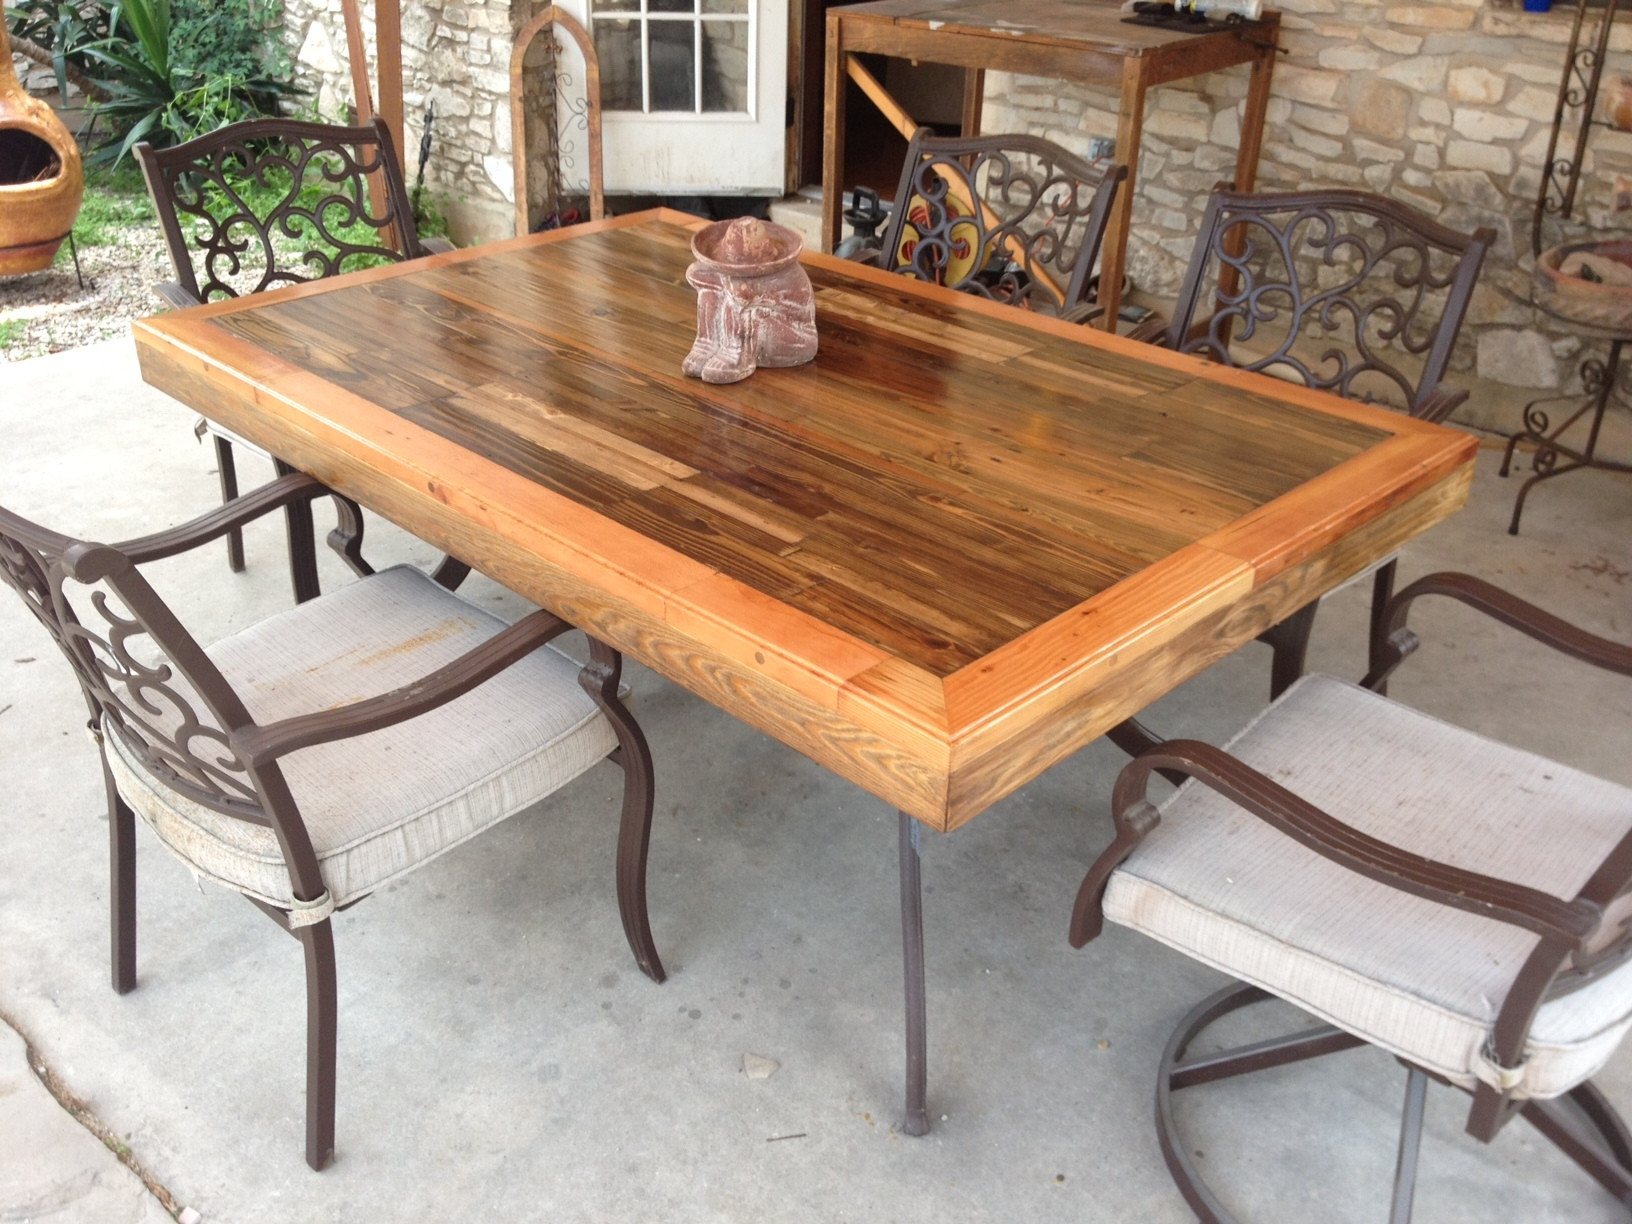 DIY Outdoor Table Top Ideas
 Patio Tabletop Made From Reclaimed Deck Wood 4 Steps